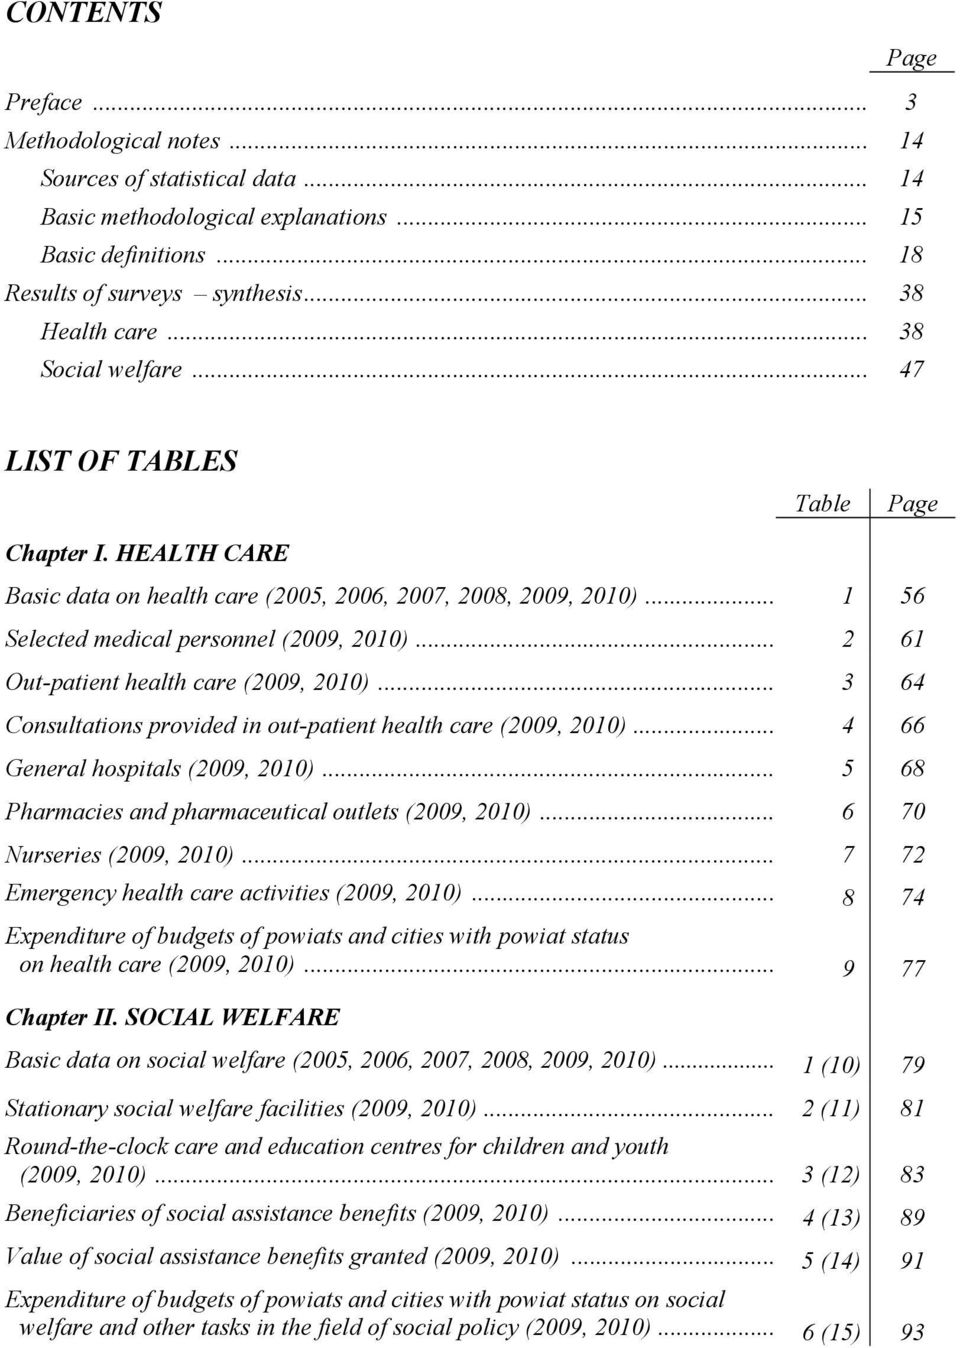 .. 2 61 Out-patient health care (2009, 2010)... 3 64 Consultations provided in out-patient health care (2009, 2010)... 4 66 General hospitals (2009, 2010).